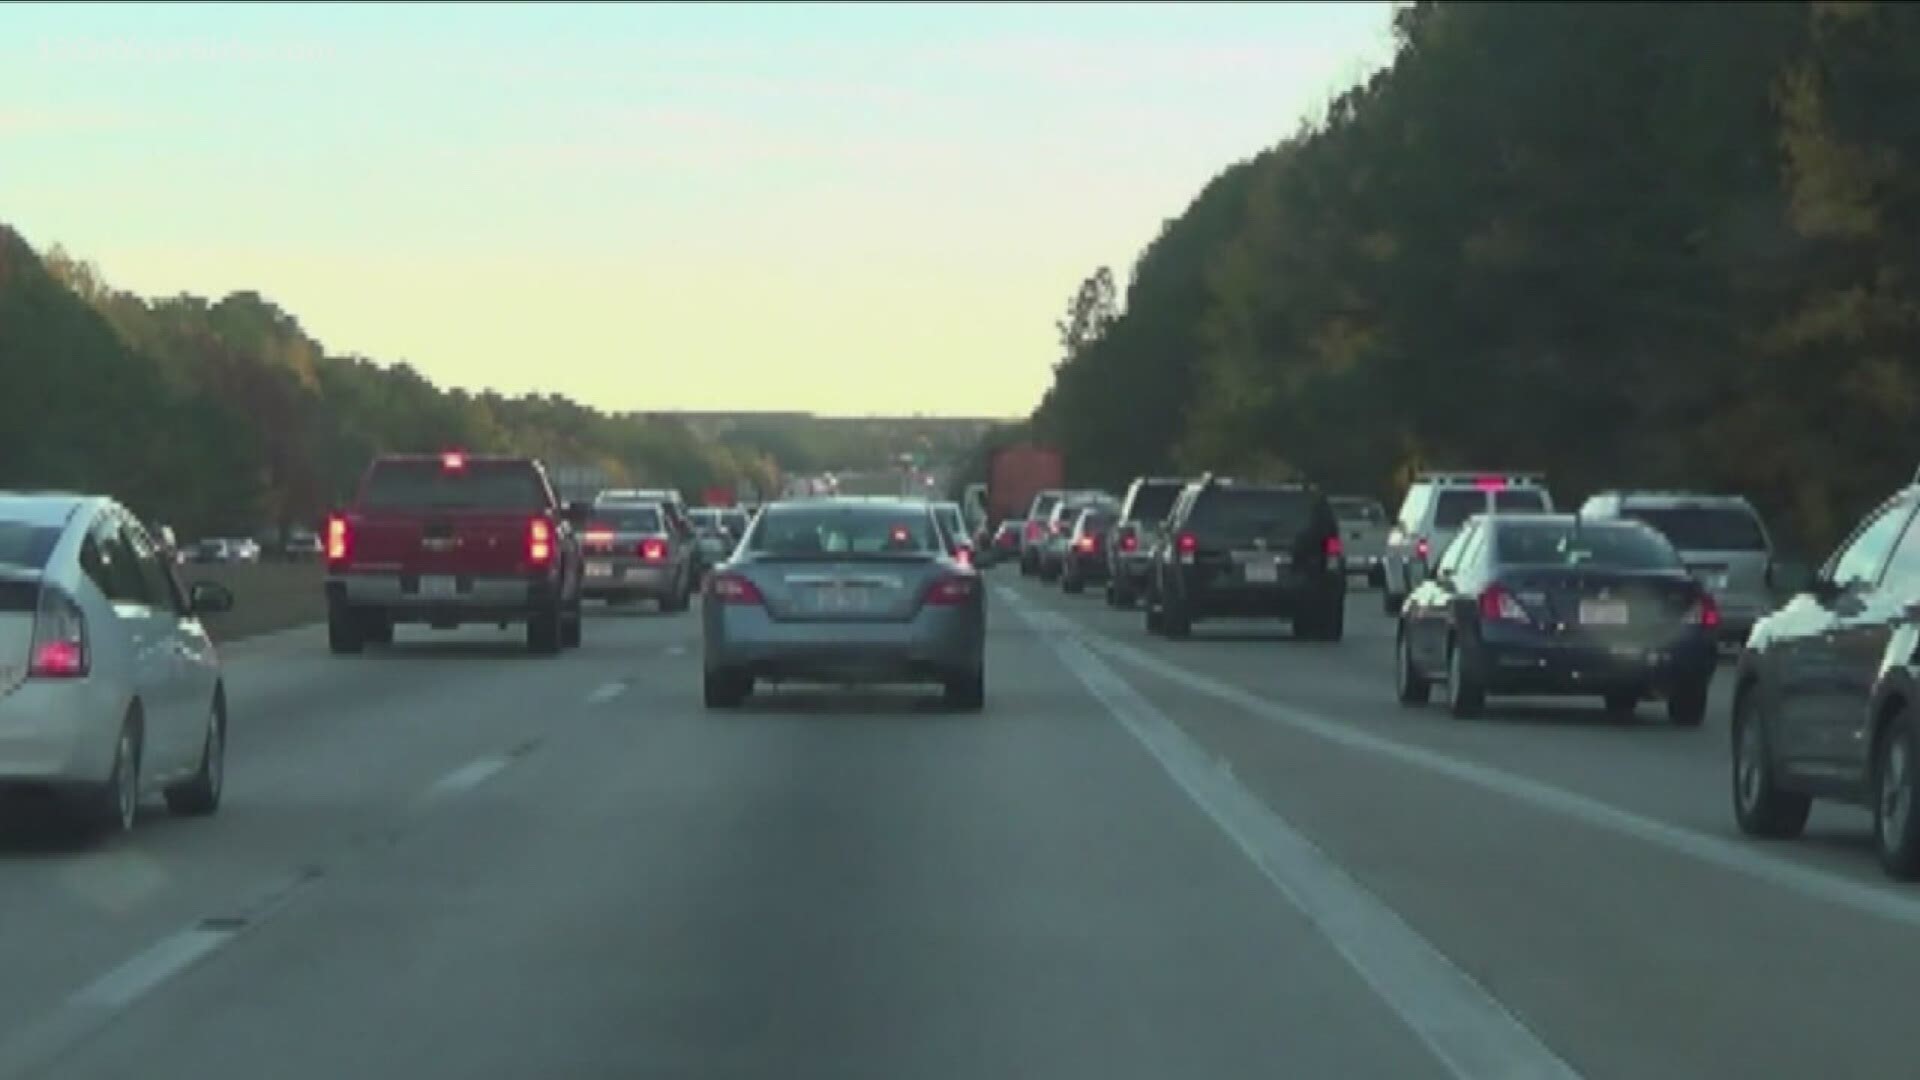 About 1.6 million Michiganders are expected to hit the roads for the Thanksgiving holiday this year.